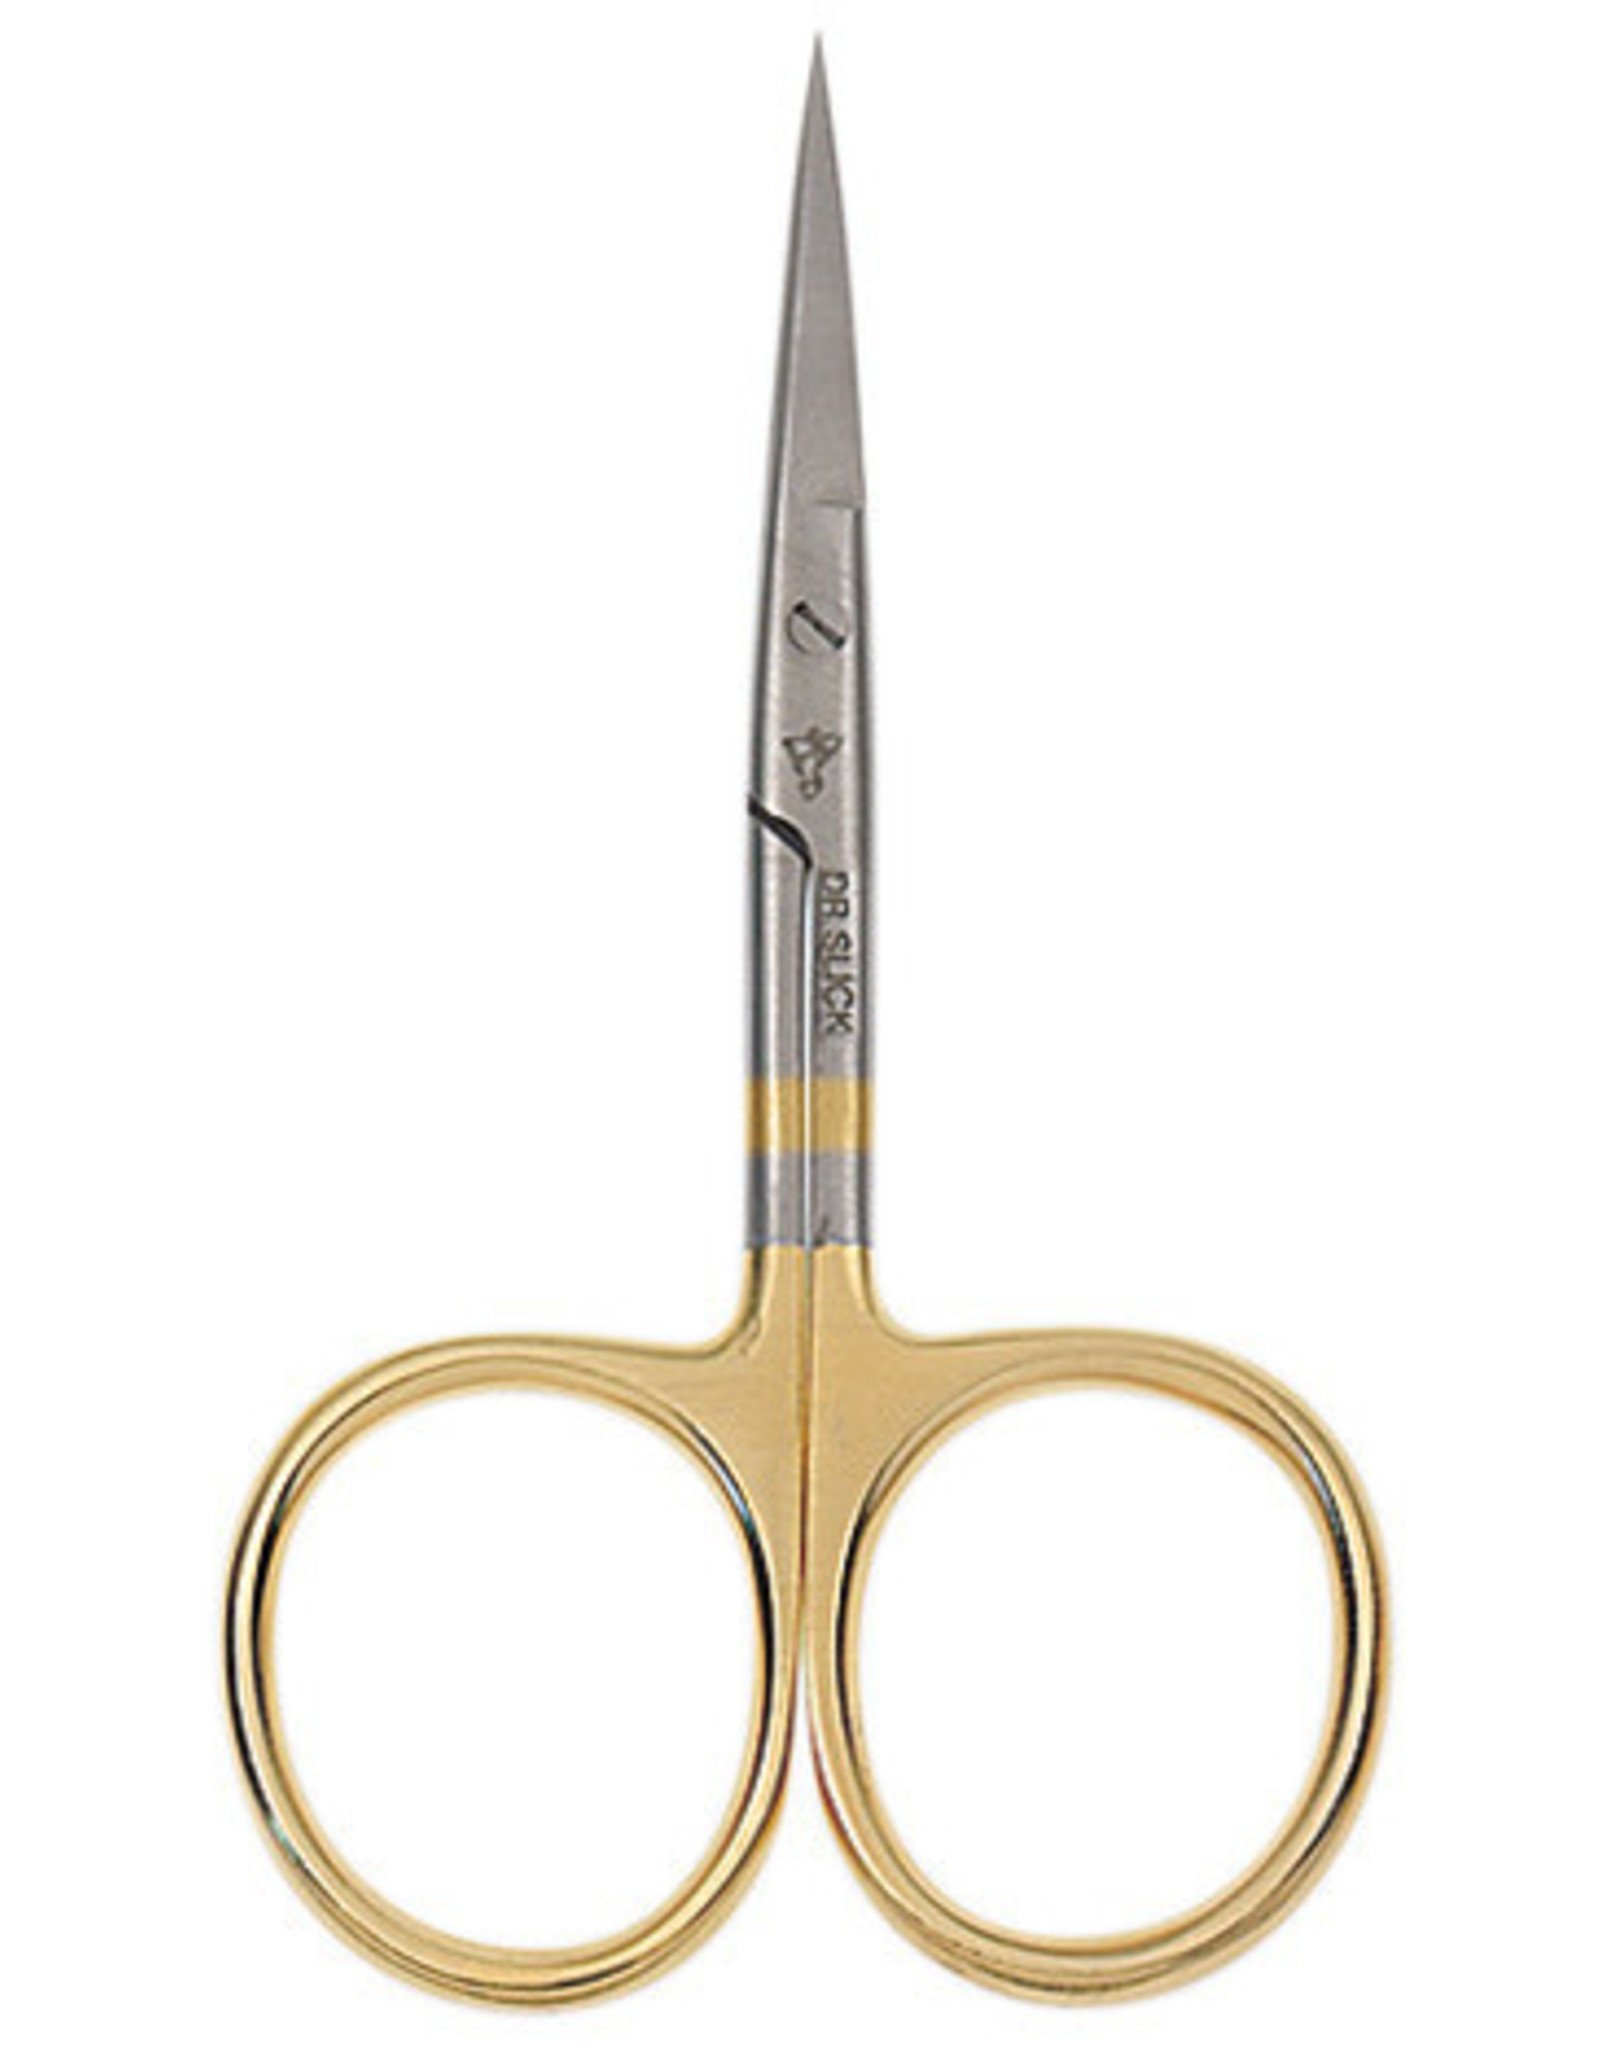 DR. SLICK All Purpose Scissor, 4", Gold Loops, Curved